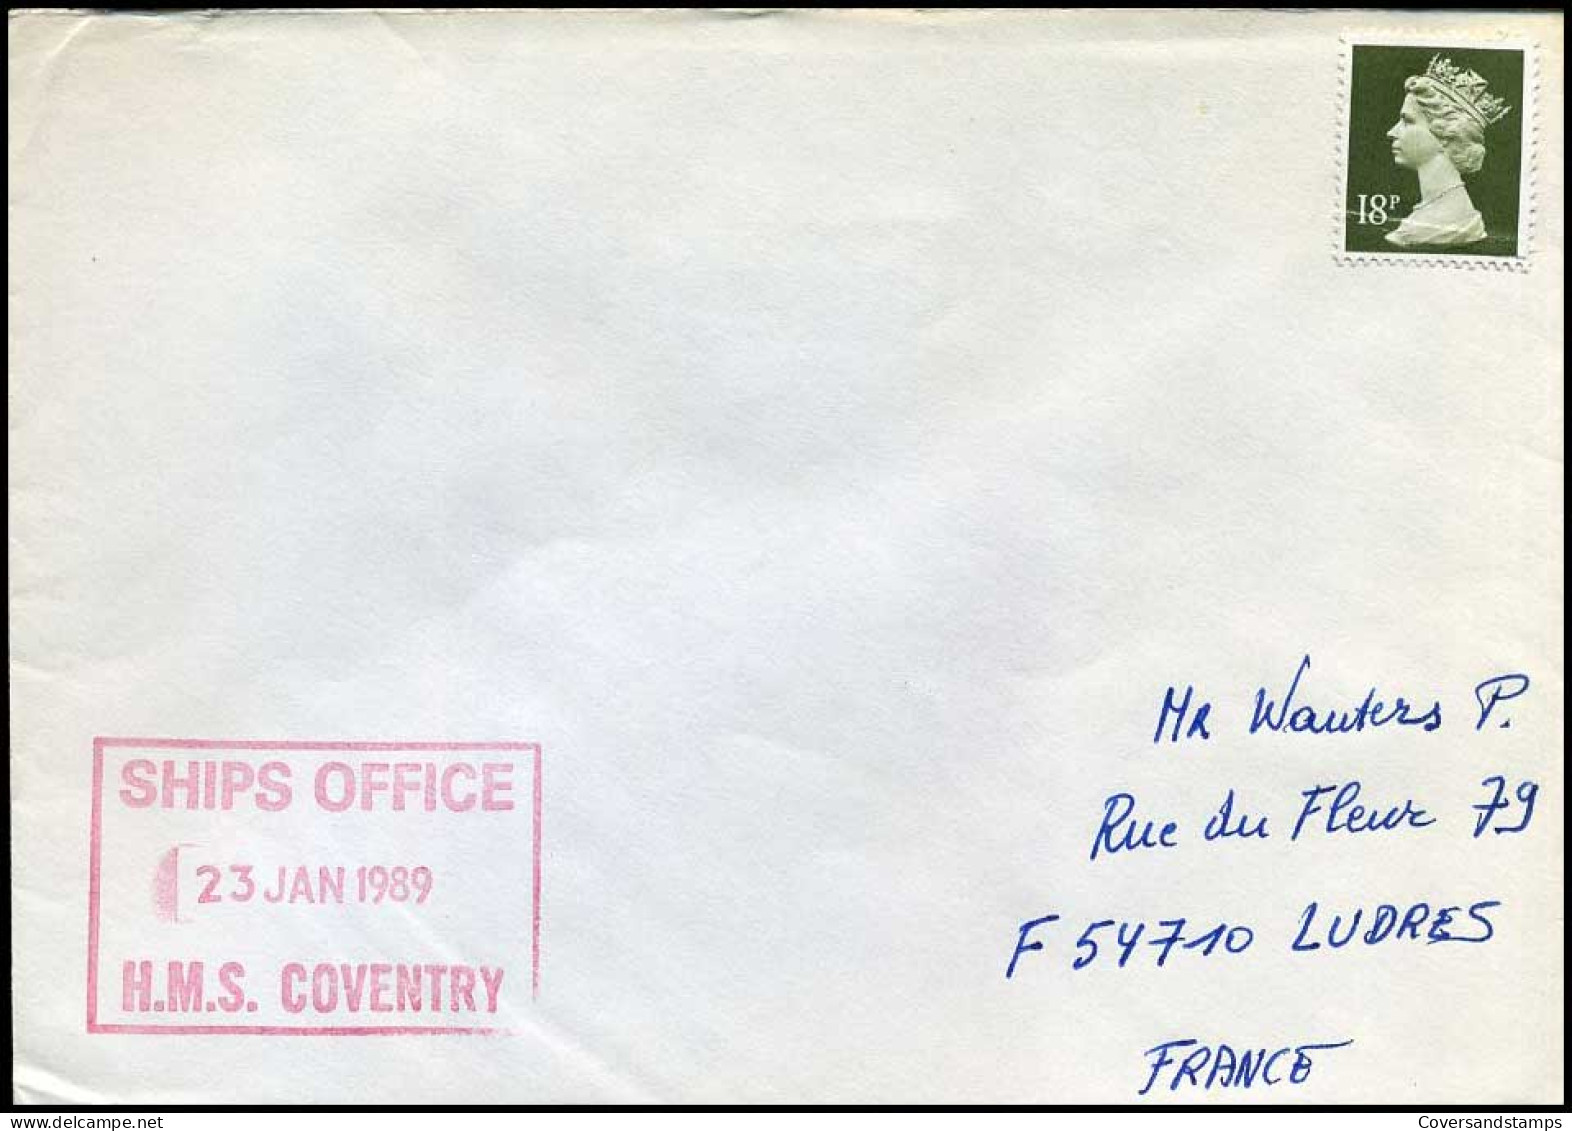 Great-Britain - Cover To Ludres, France - HMS Coventry - Covers & Documents